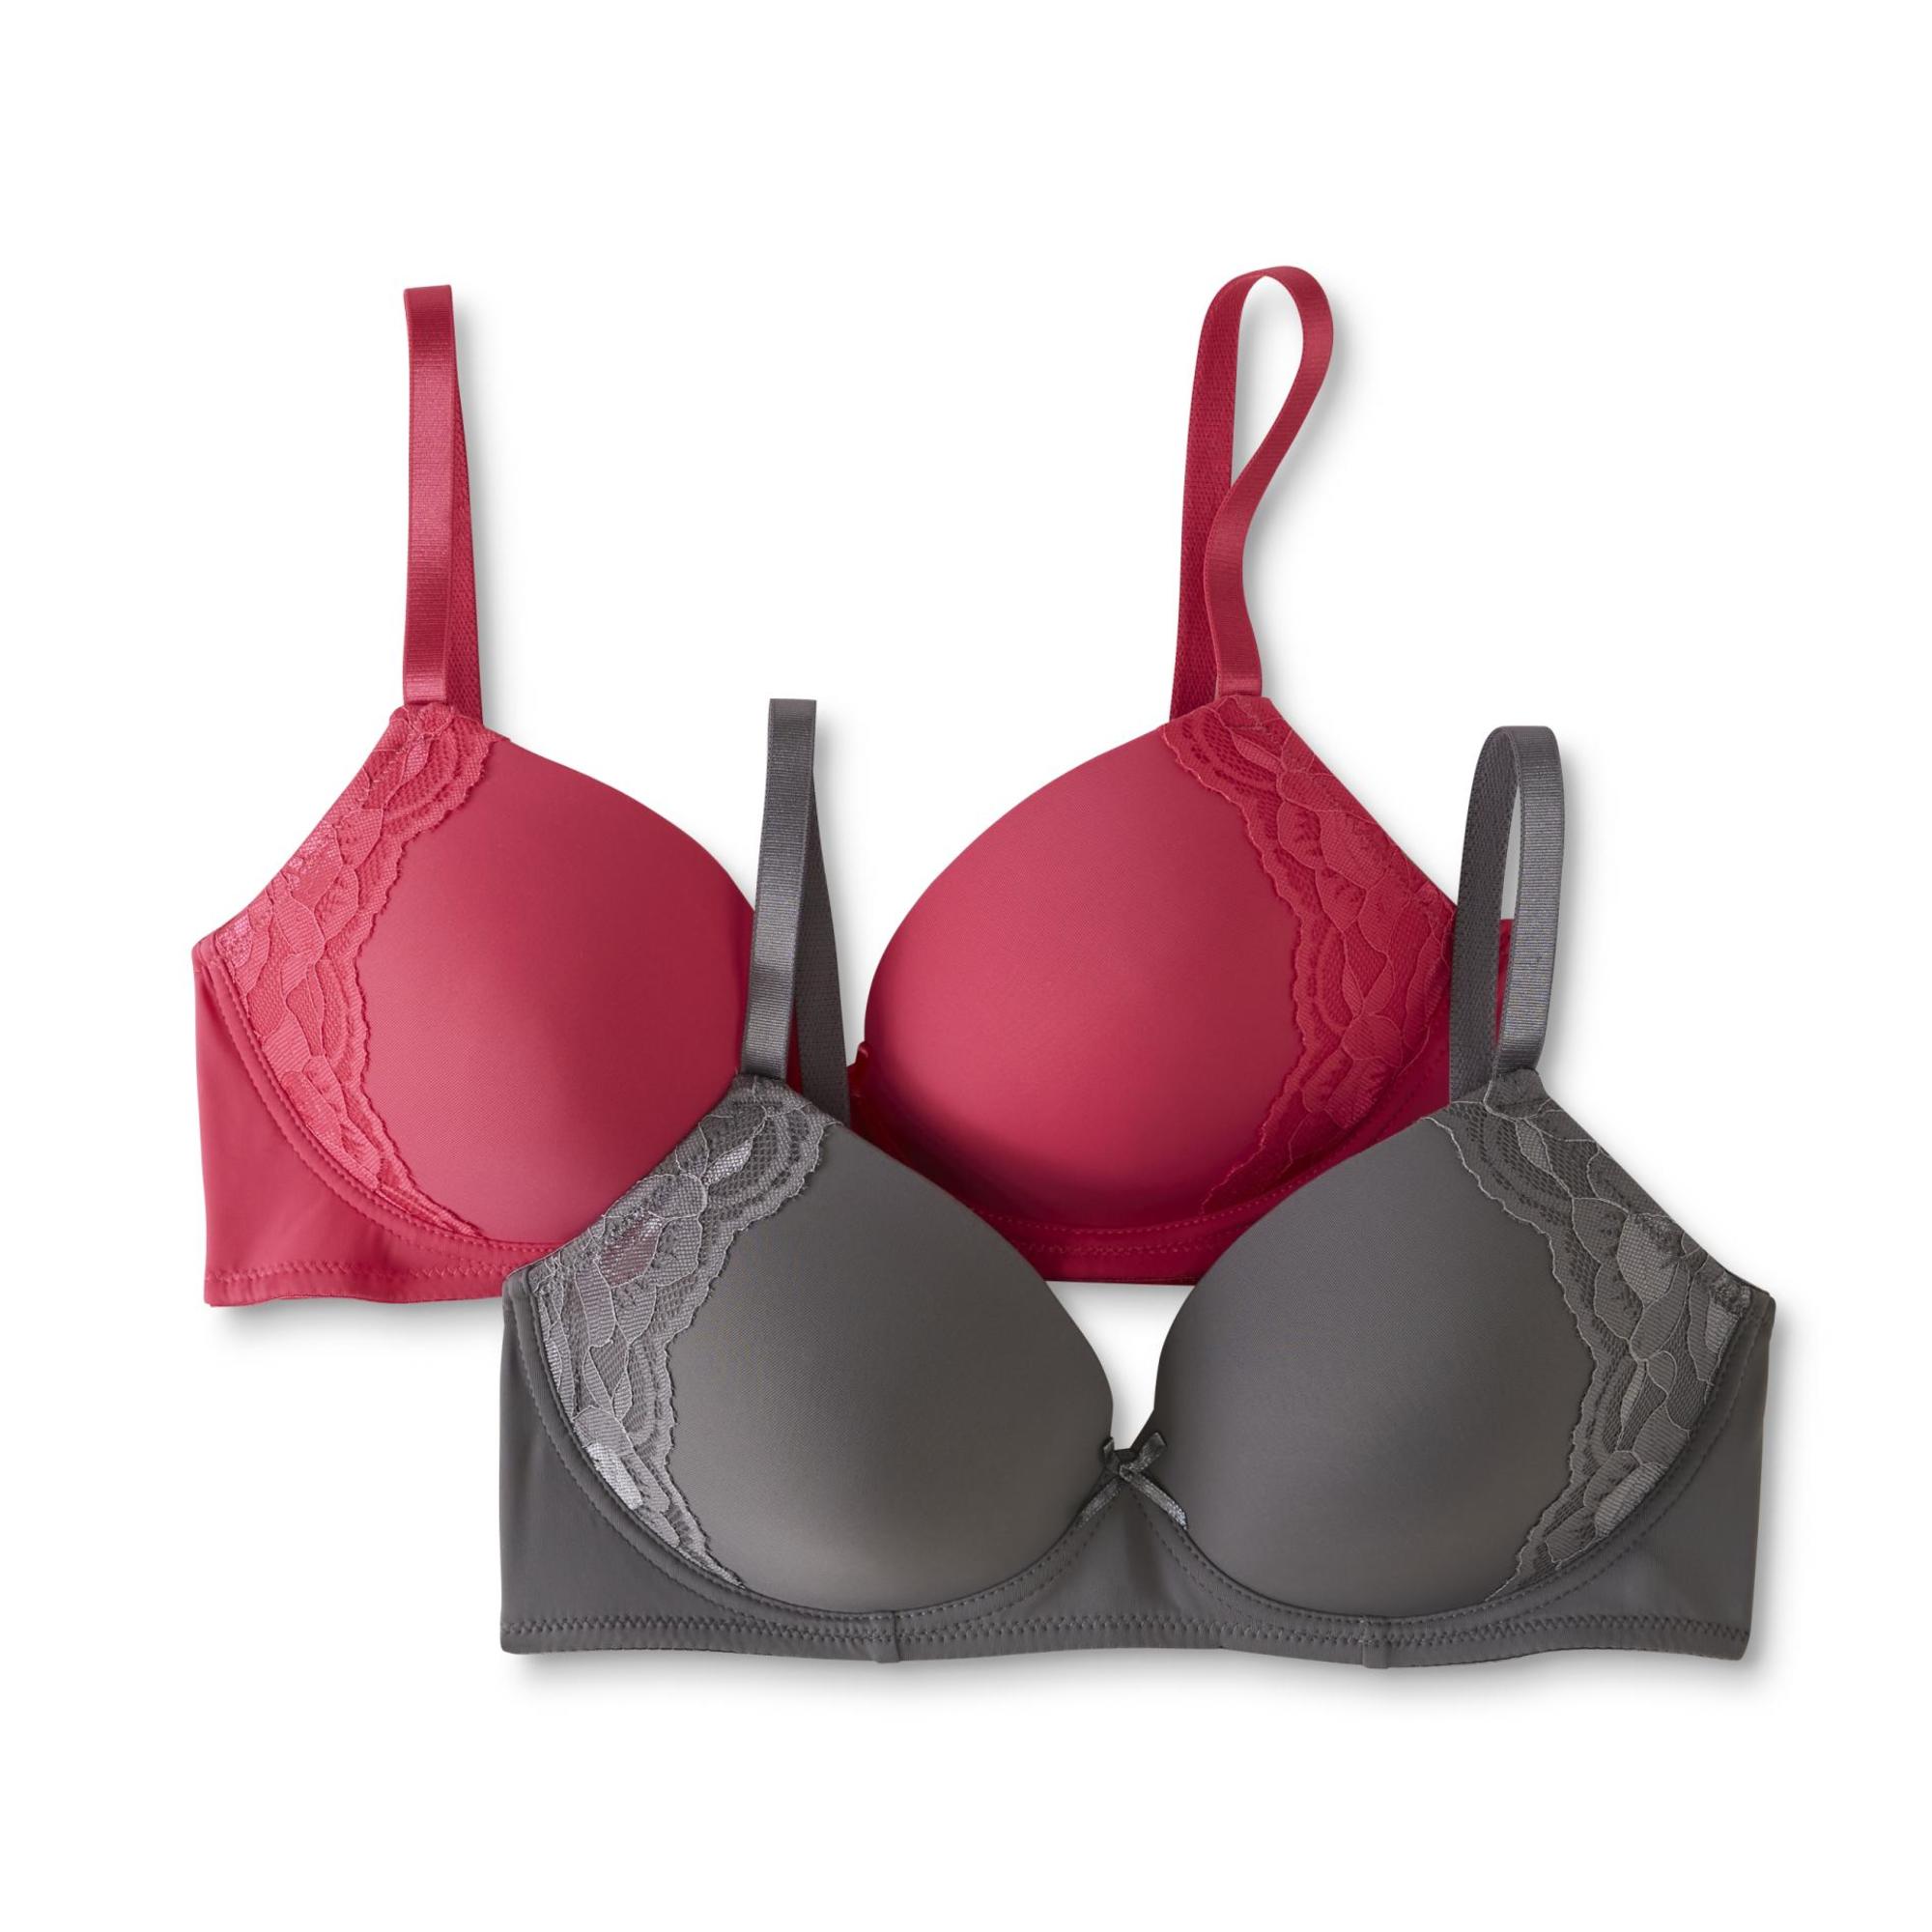 Simply Styled Women's 2-Pack Lace Wire-Free Bras - Sears